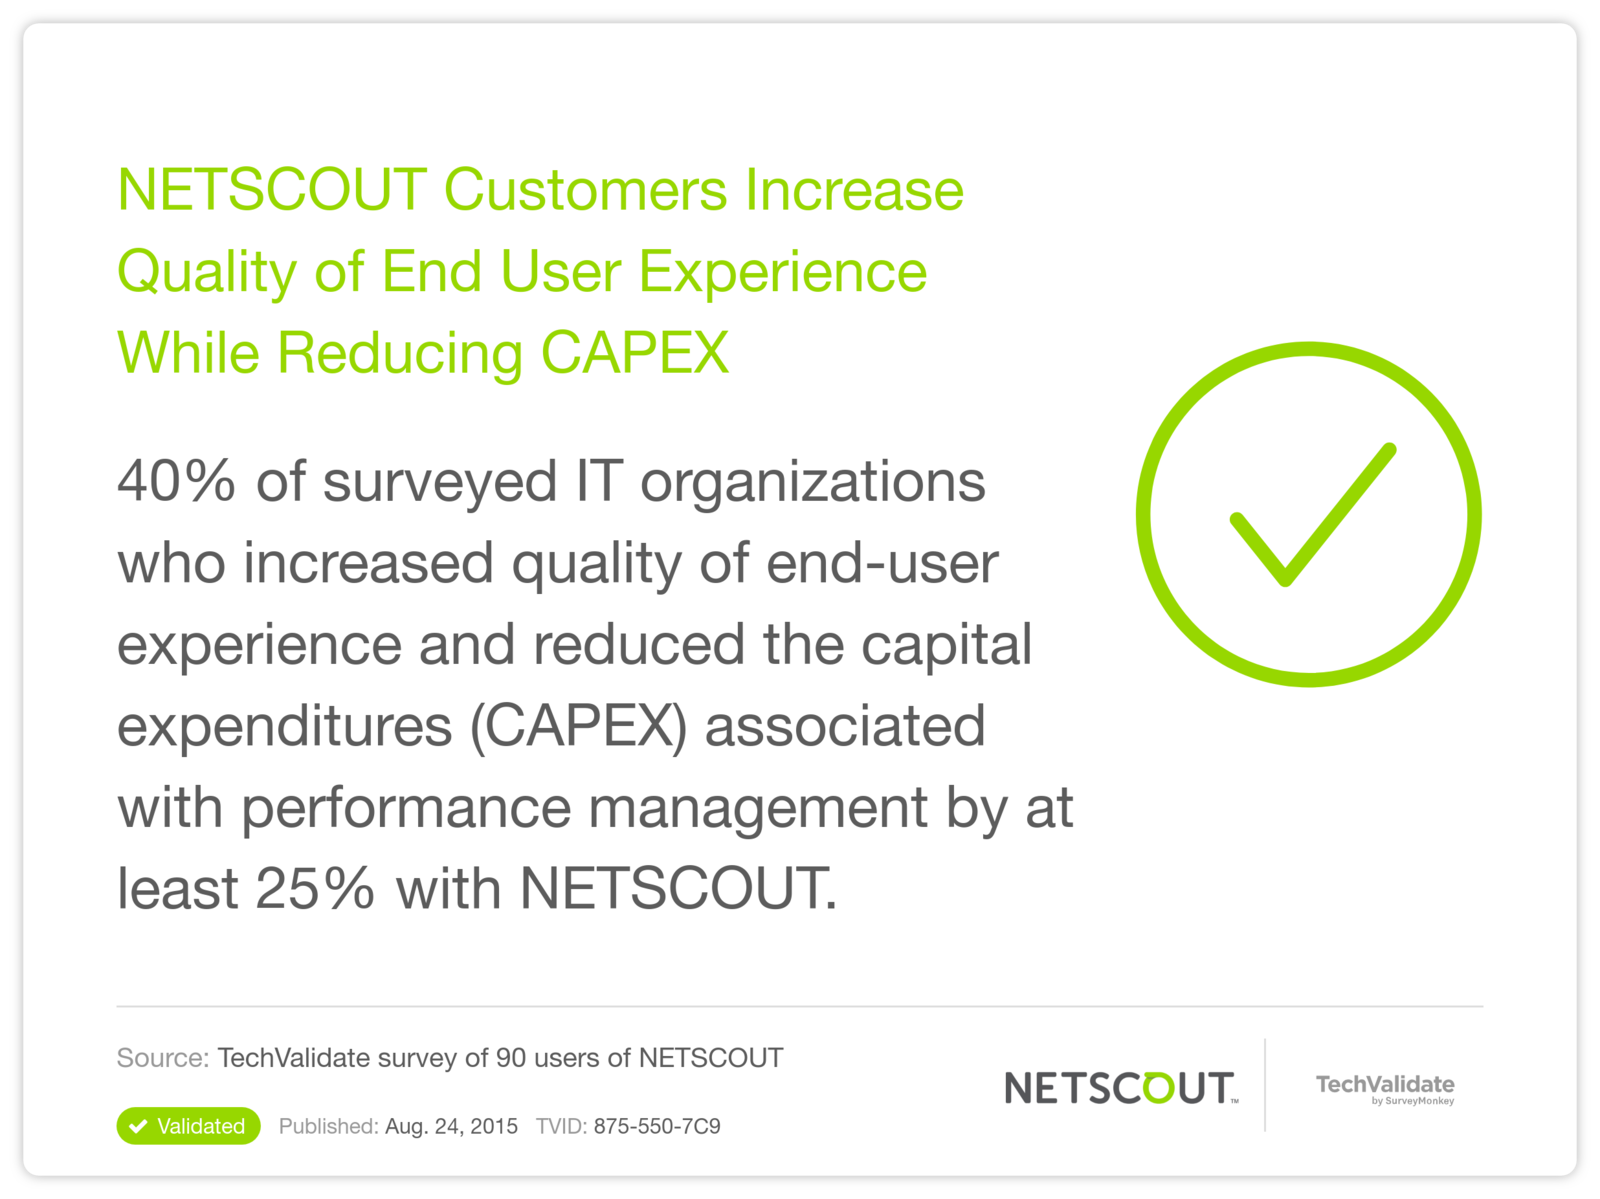 NETSCOUT Customers Increase Quality of End User Experience While Reducing CAPEX